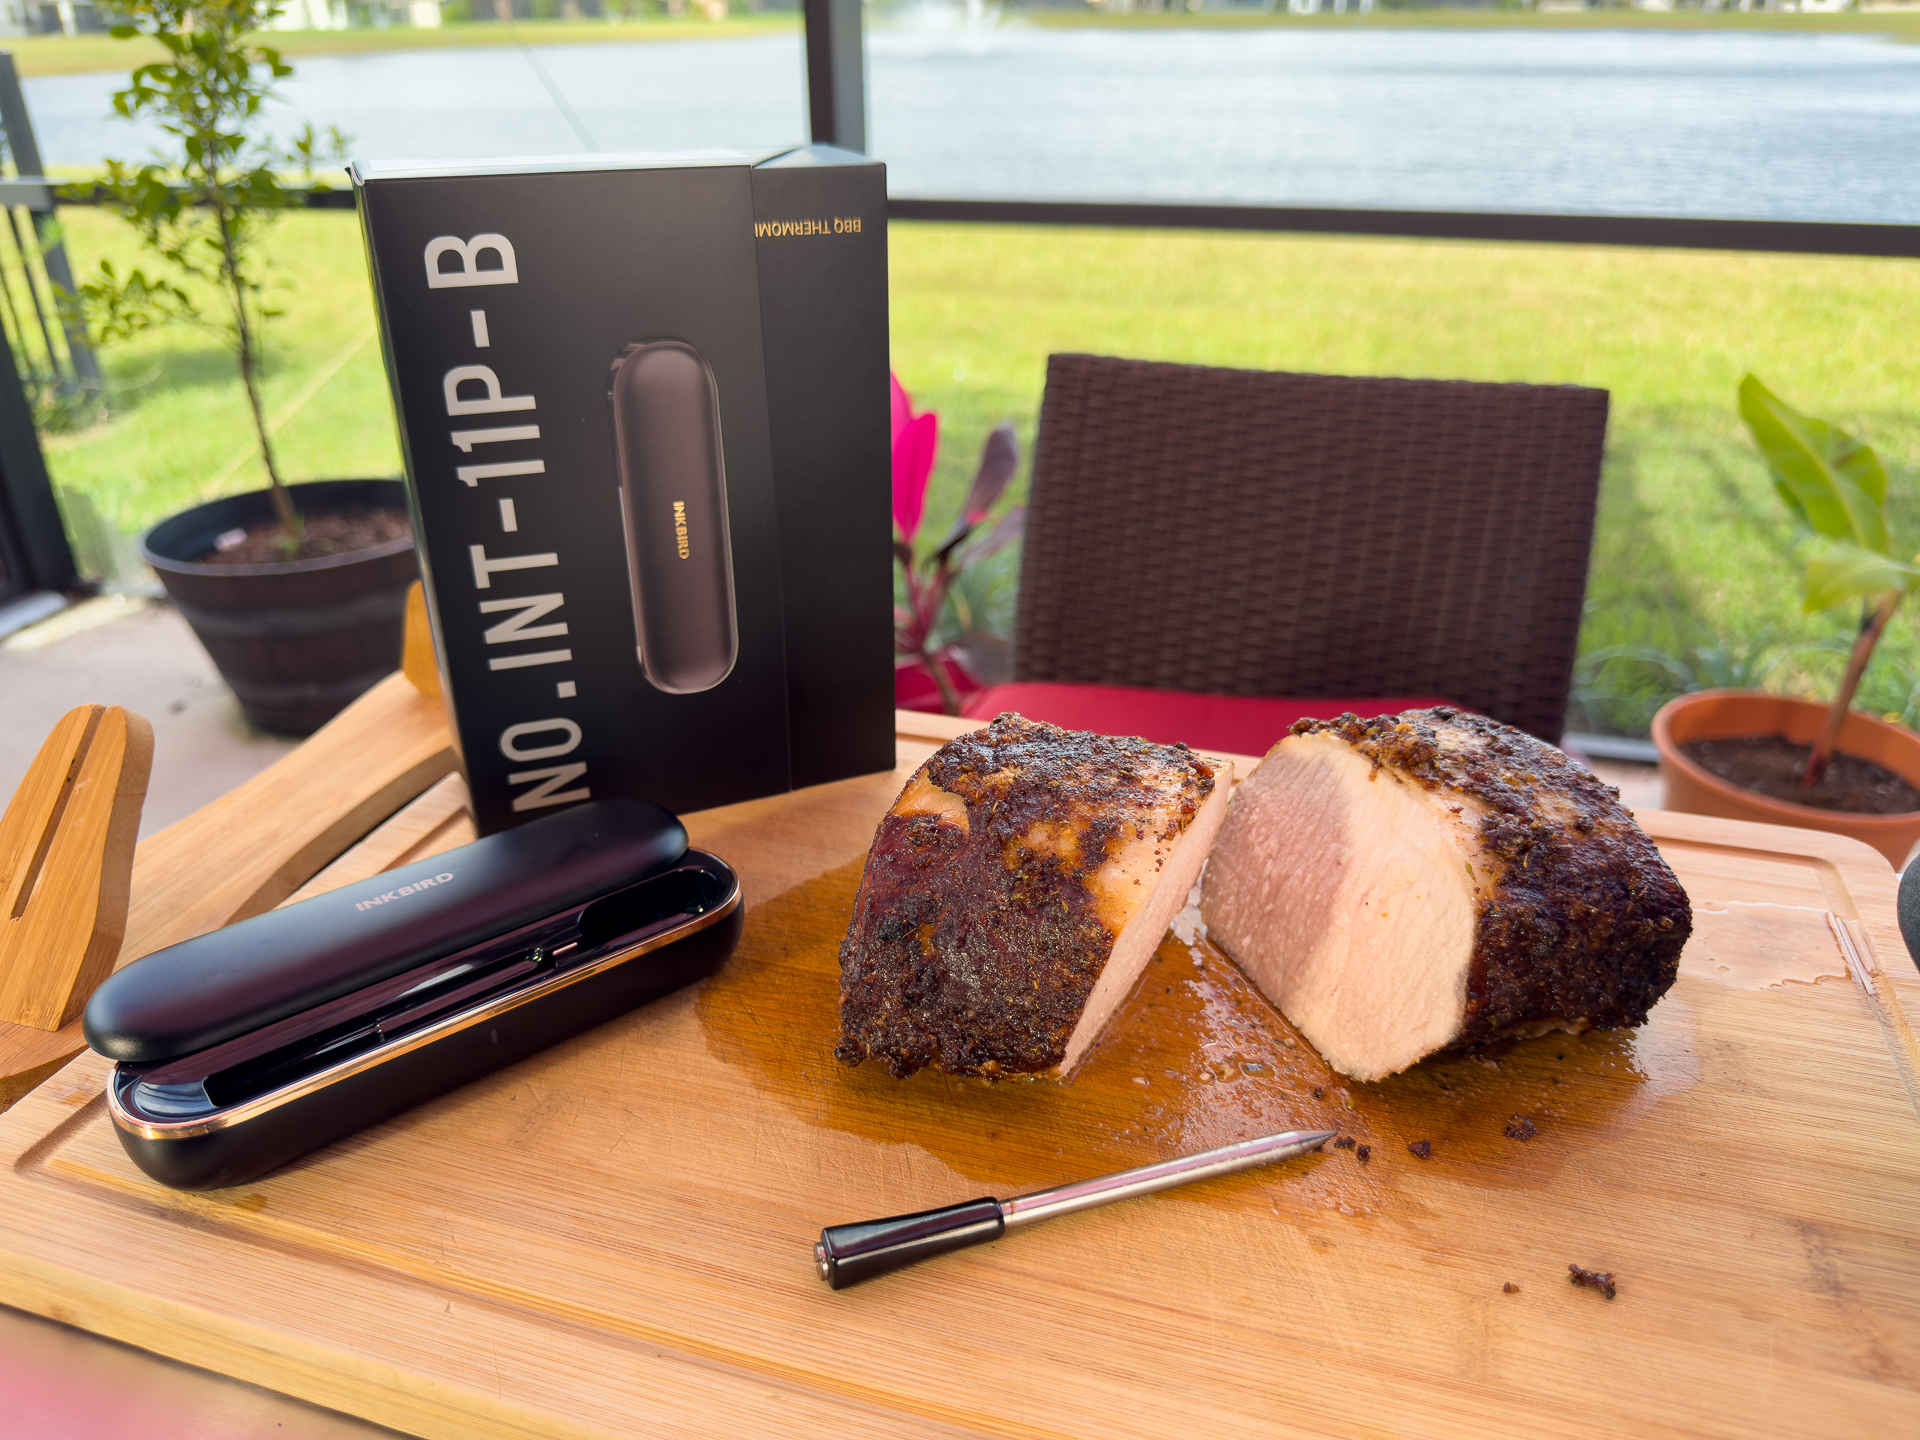 INKBIRD Wireless Meat Thermometer INT-11P-B, Bluetooth Meat